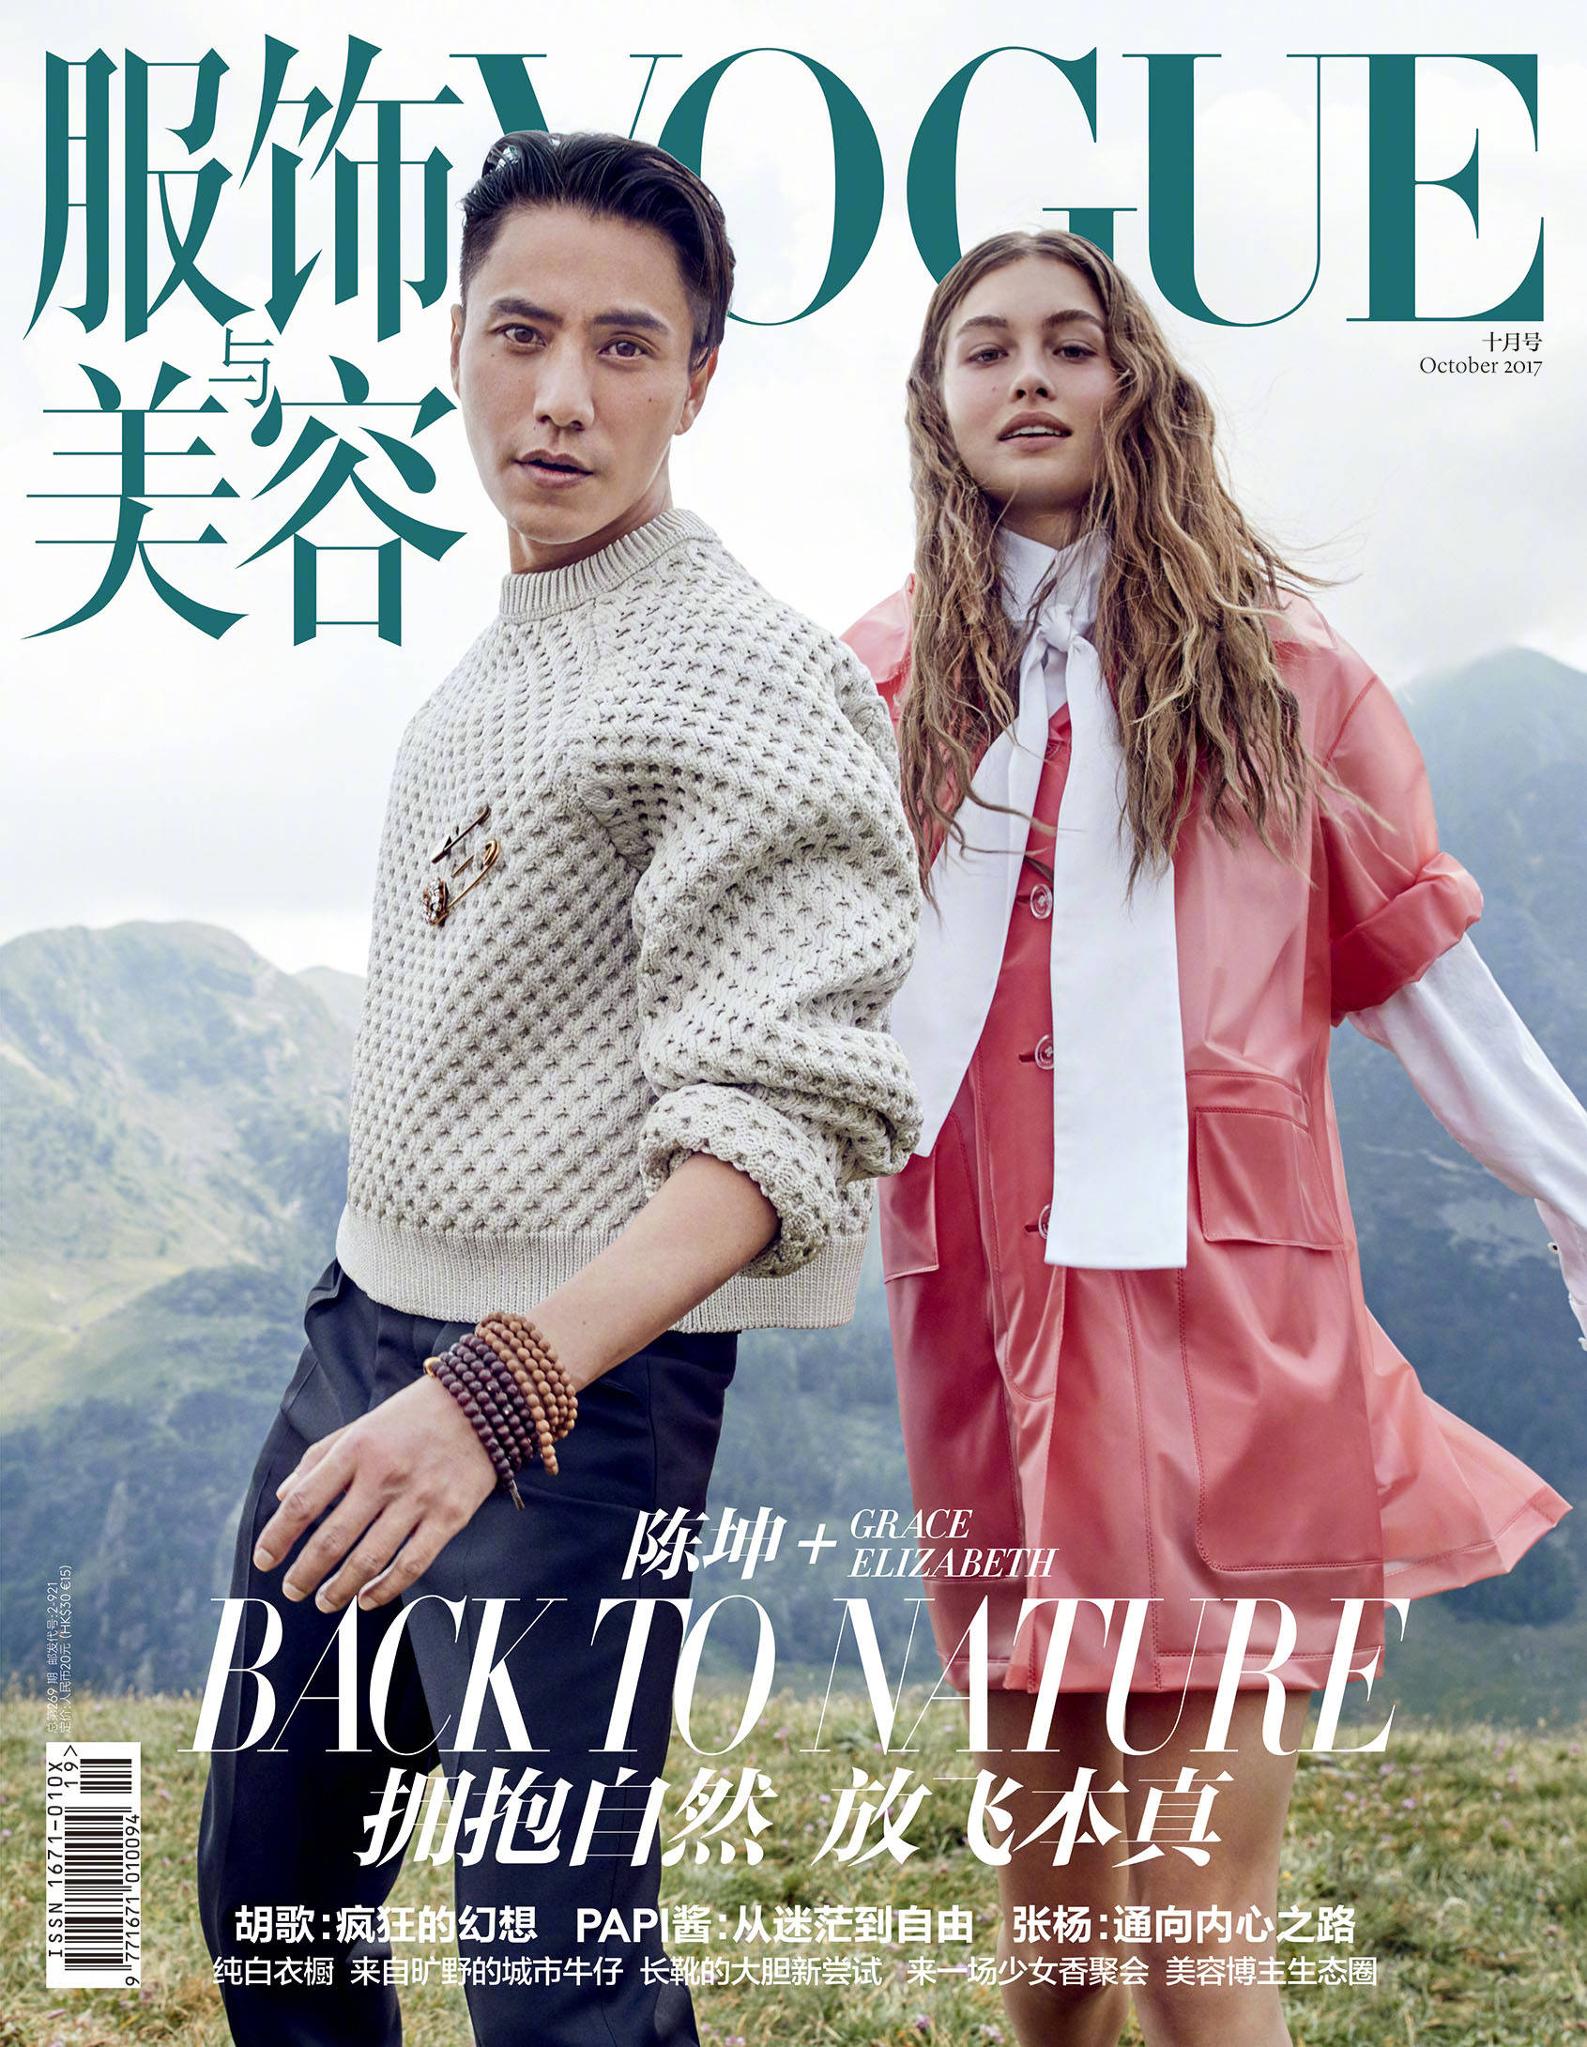 Burberry Twitterissä: "Actor Chen Kun and model Grace Elizabeth on cover of China in the new @Burberry collection. Photographed by Nathaniel Goldberg / Twitter